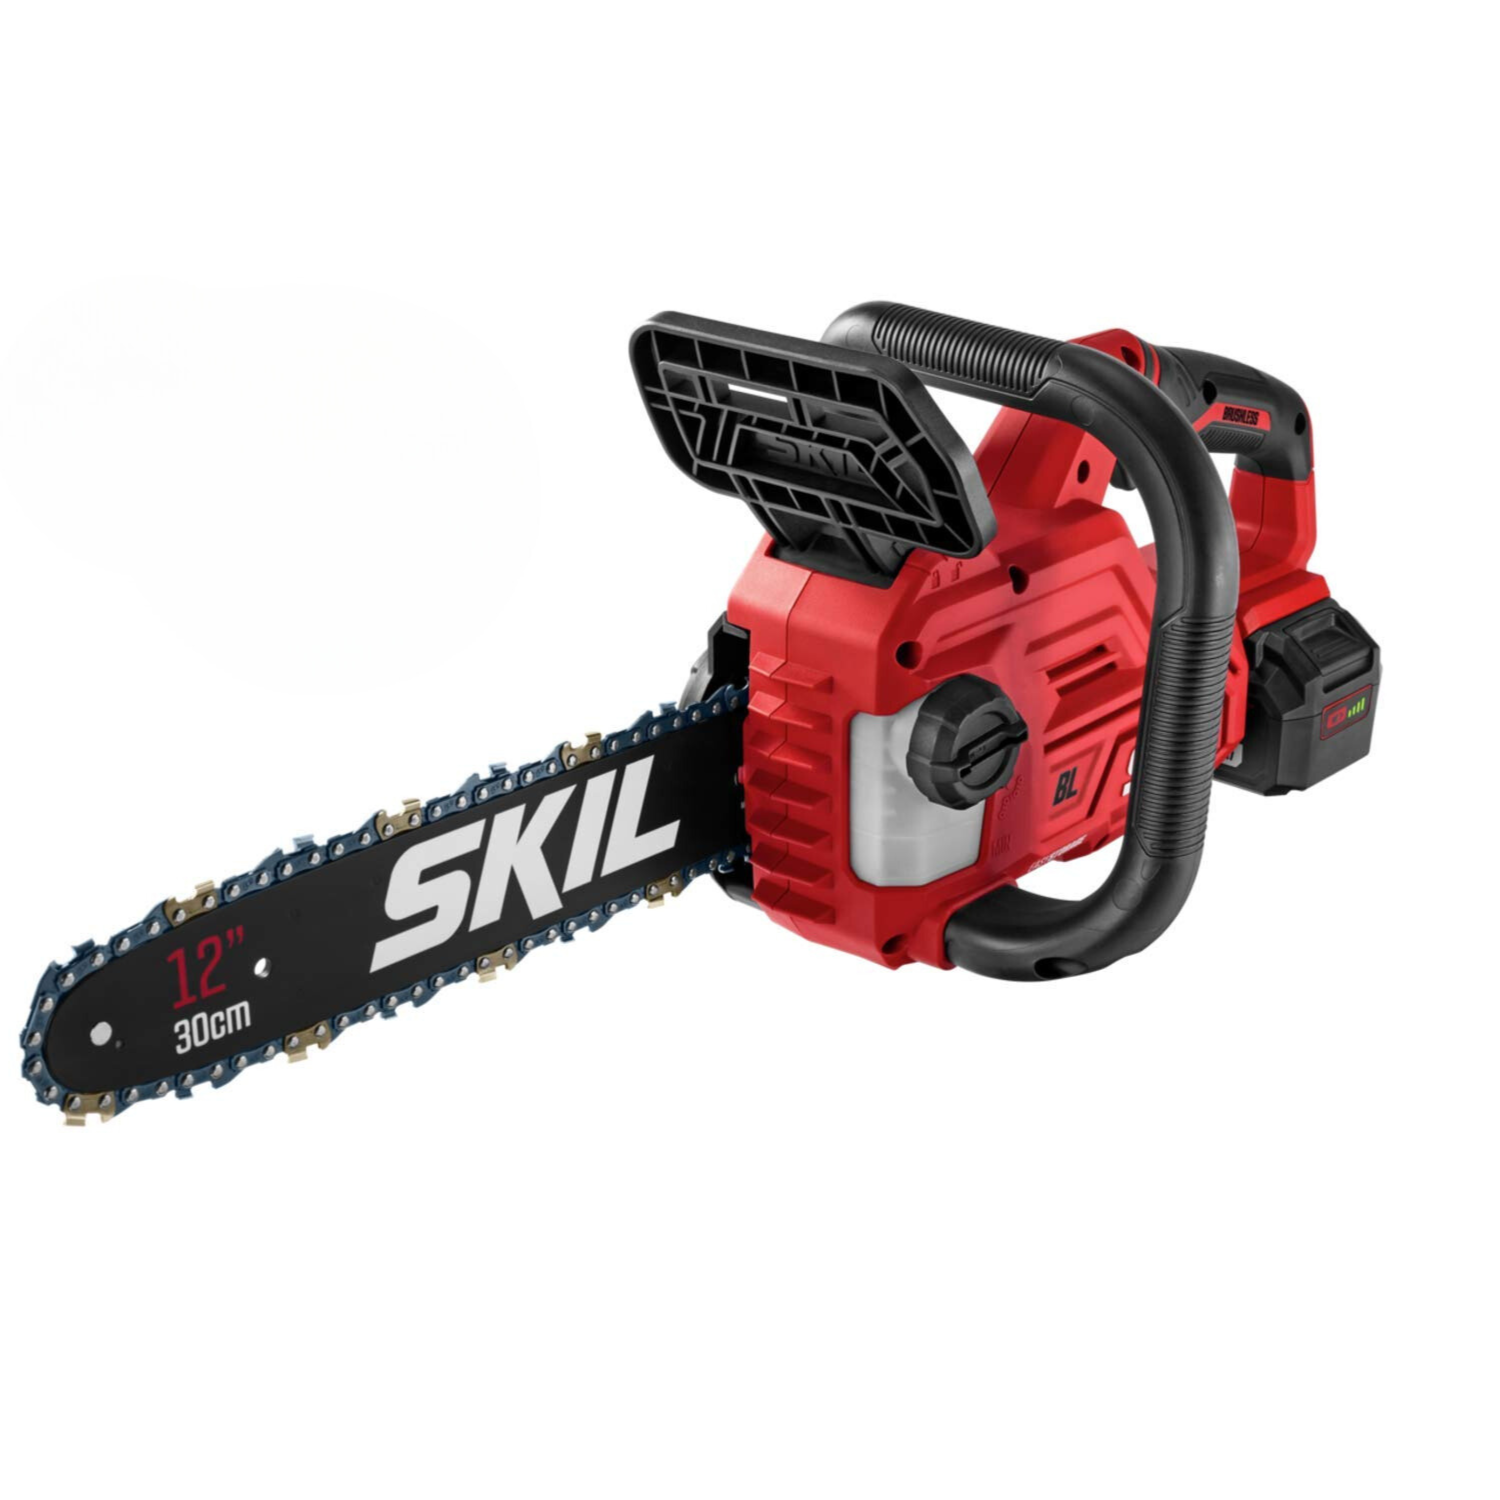 a milwaukee chainsaw on a white background